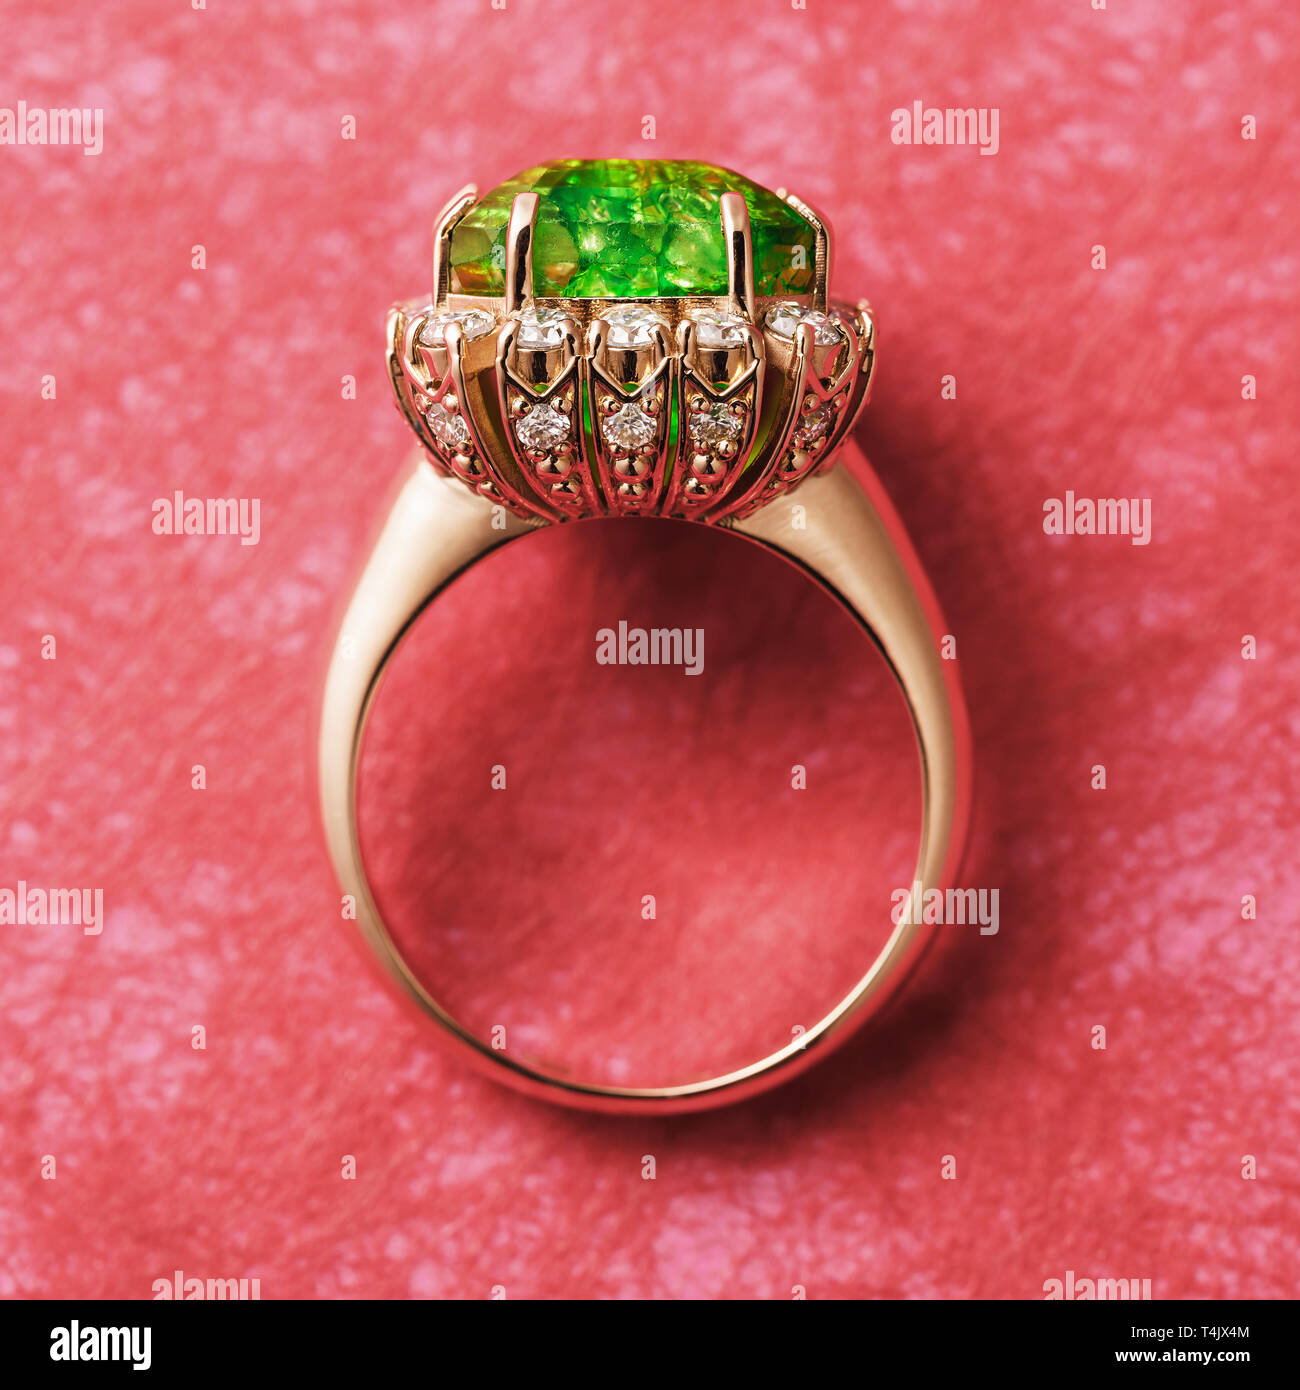 Golden ring with large emerald and small cubic zirconias on a red abstract background Stock Photo